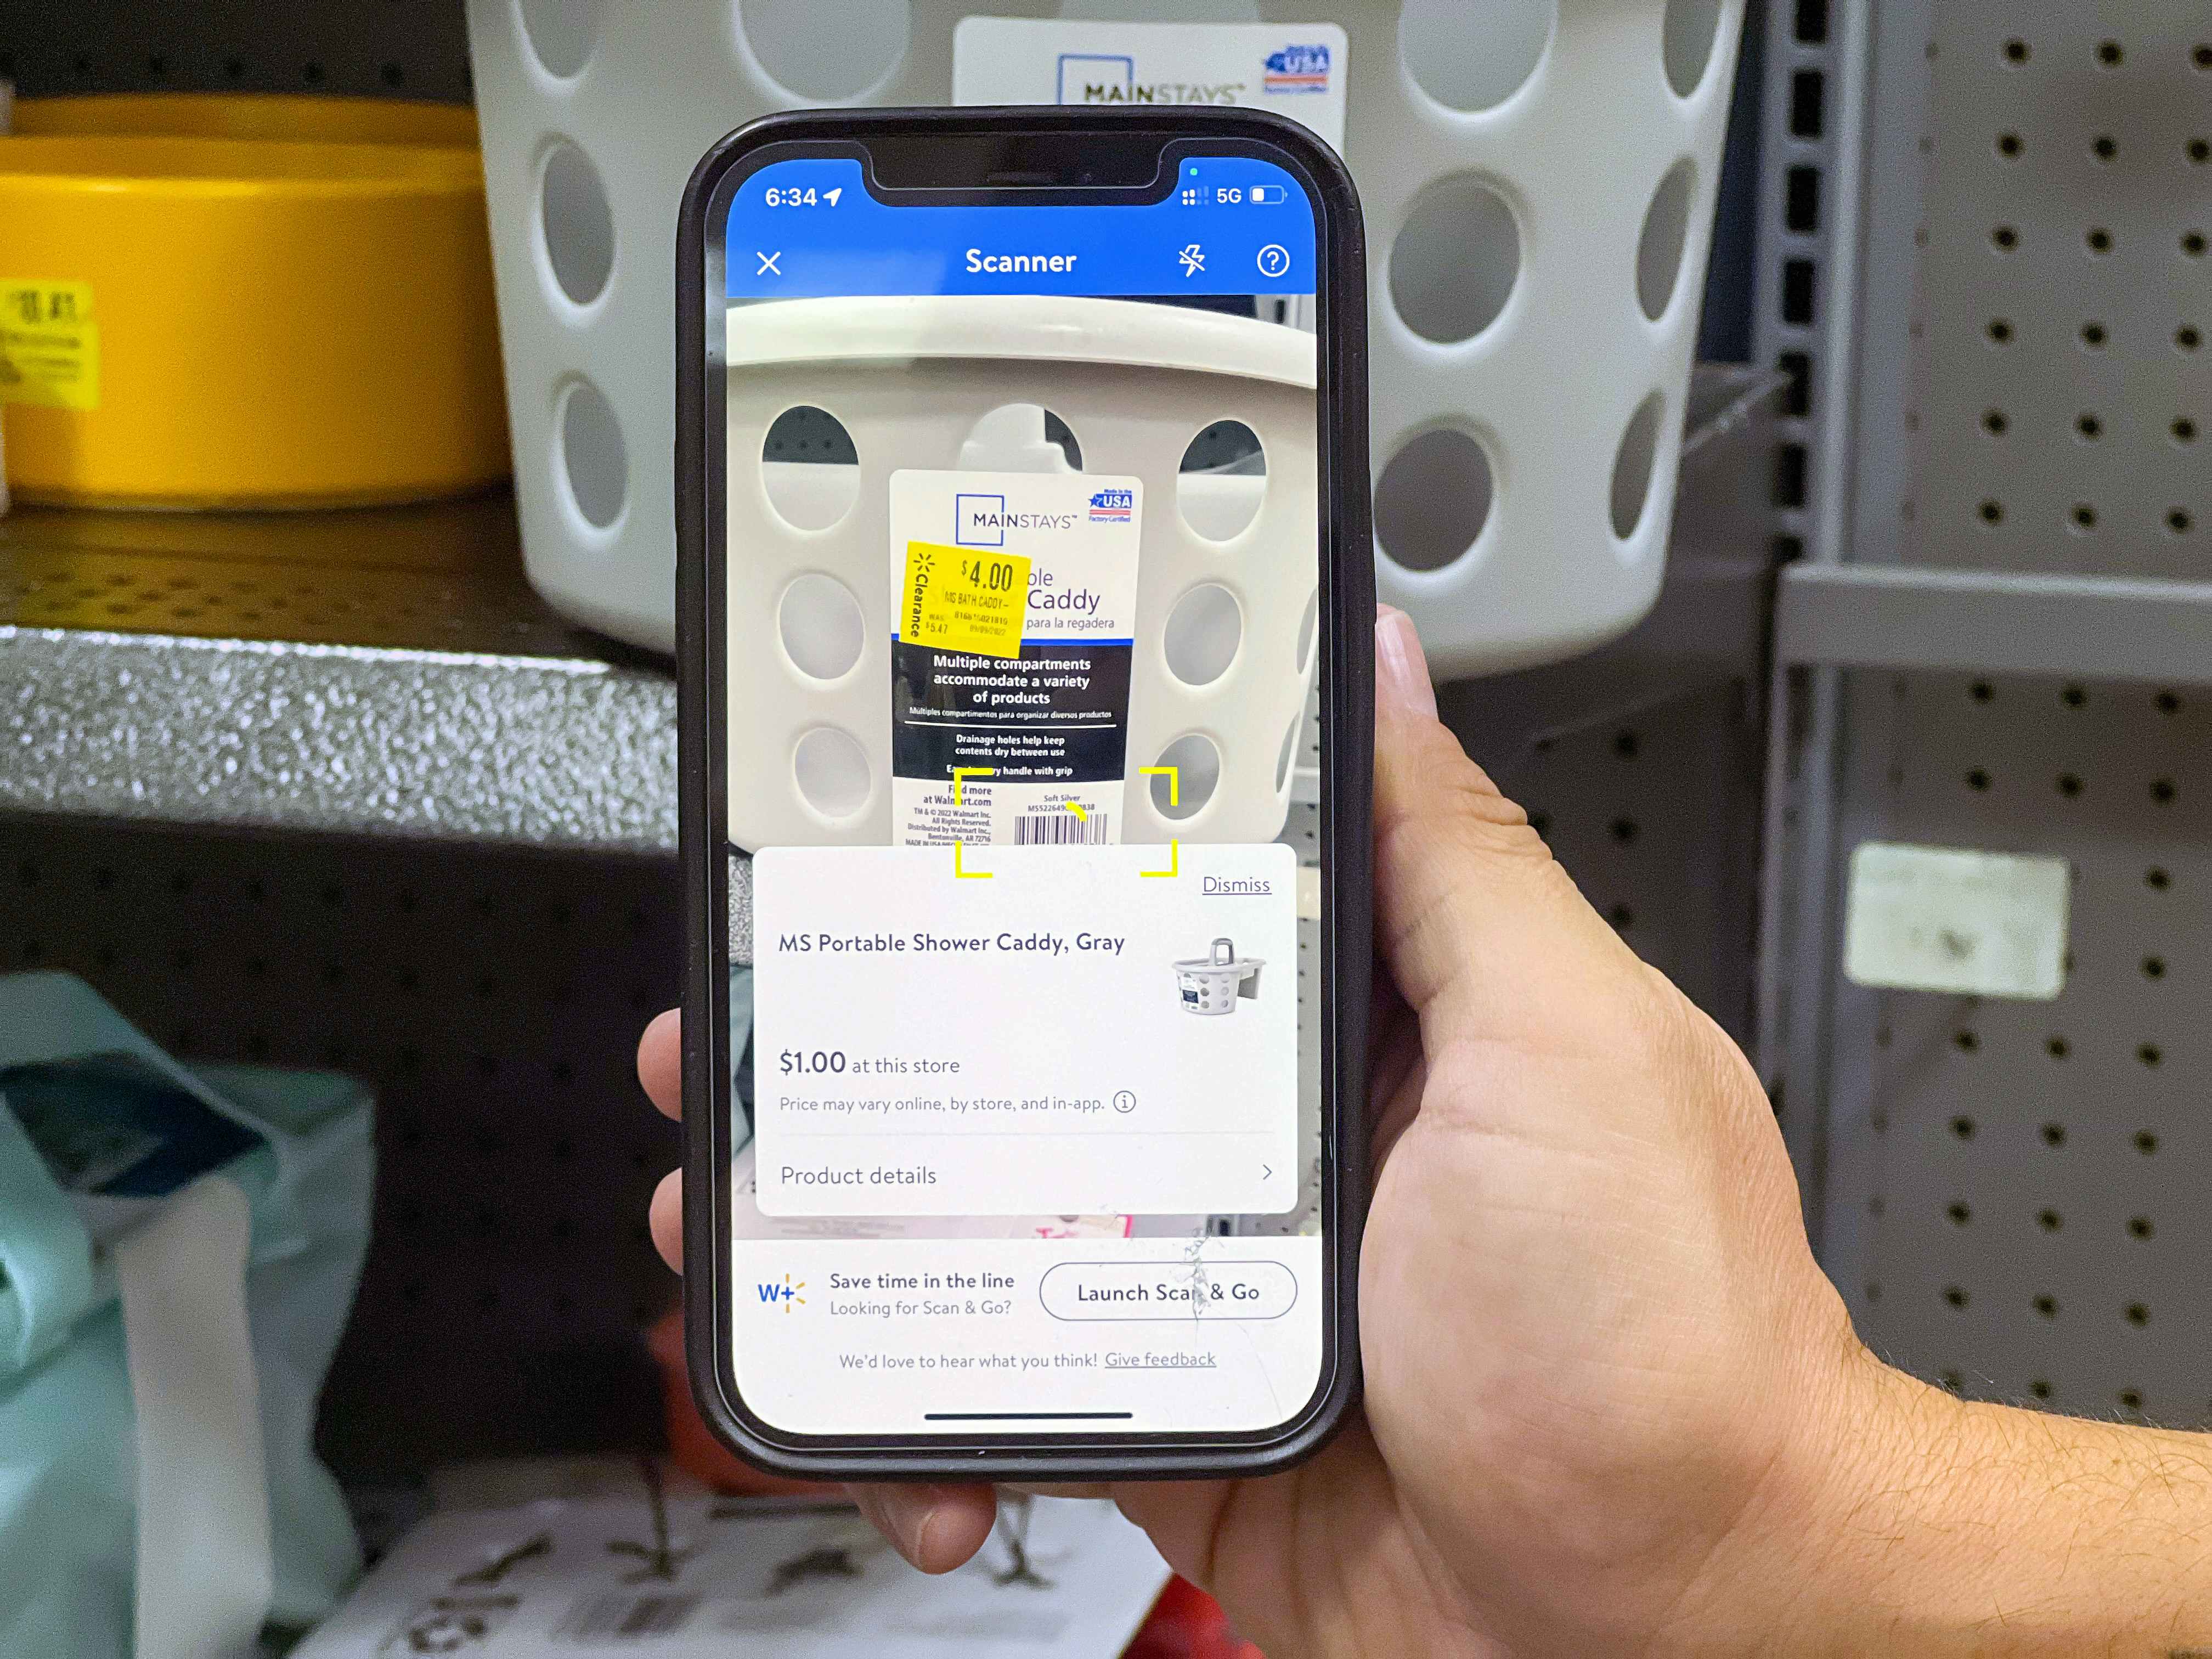 Someone holding a phone, scanning a clearance item in the Walmart app which shows that although the sticker says the item is $4, it is actually only $1